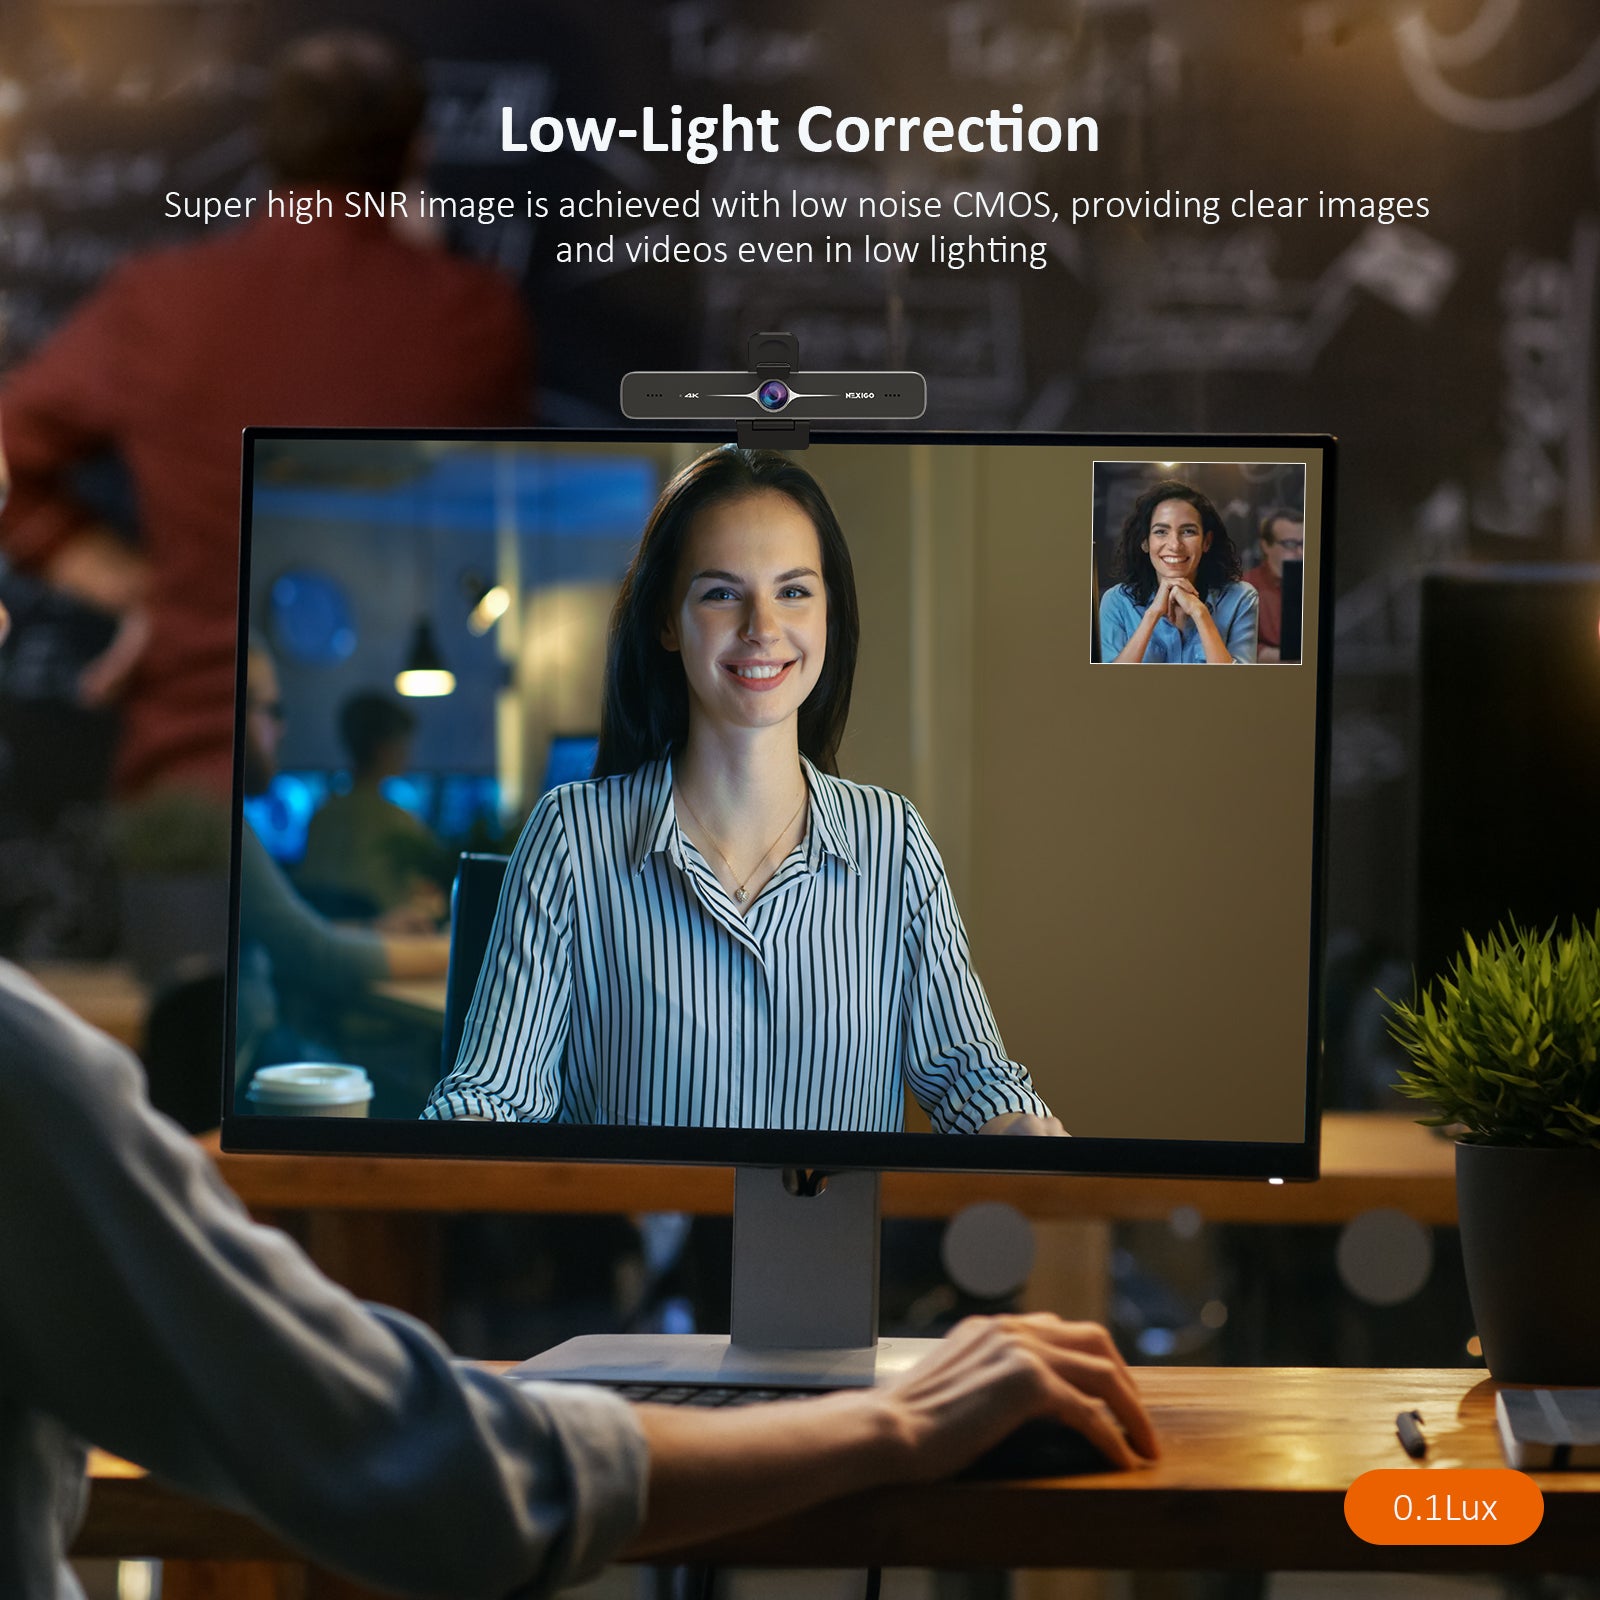 Webcam with low-light correction provides clearer image in dim environments.